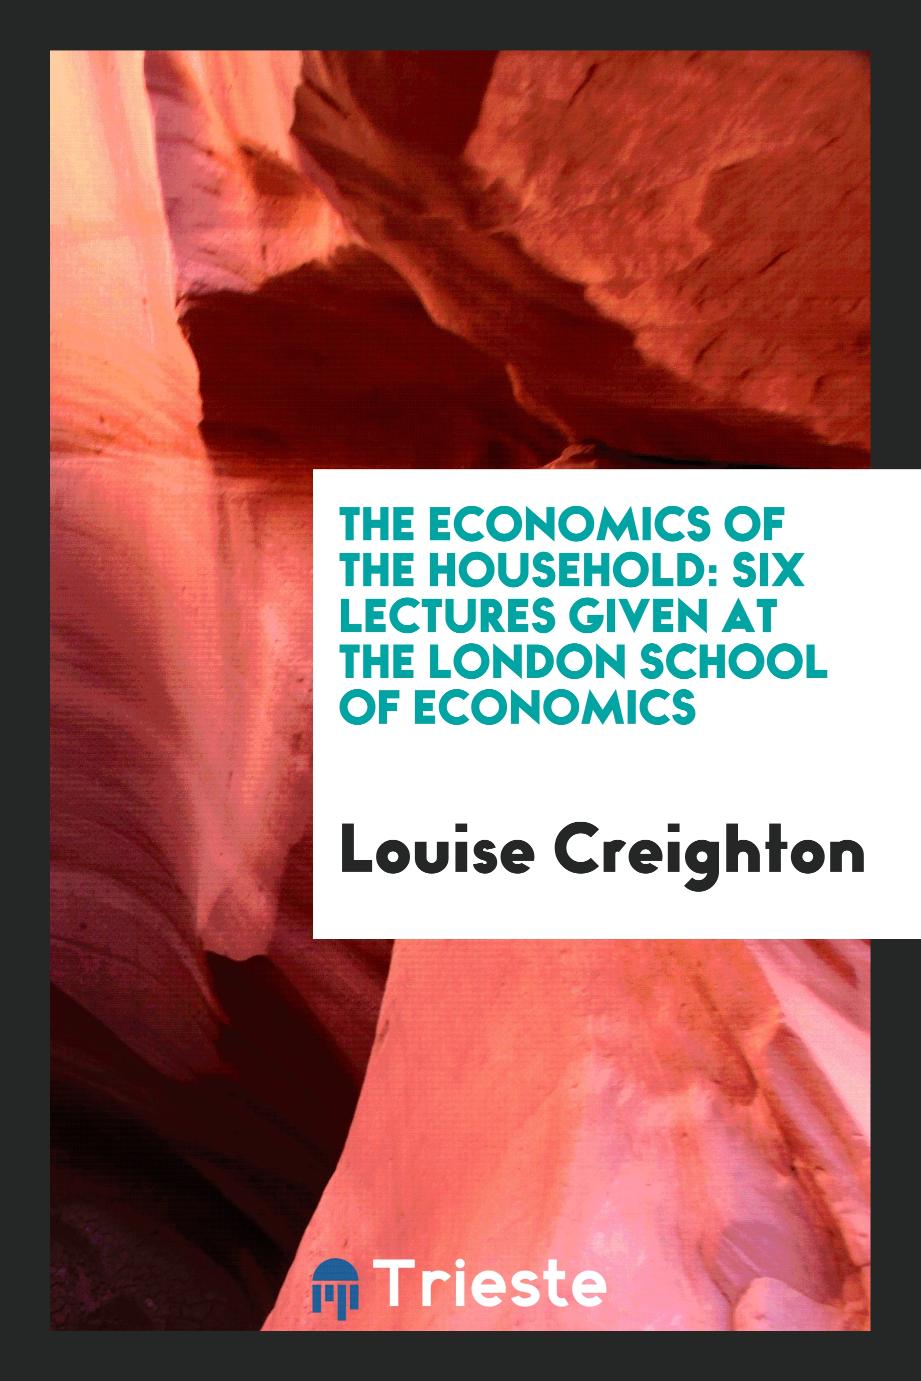 The Economics of the Household: Six Lectures given at the London School of Economics